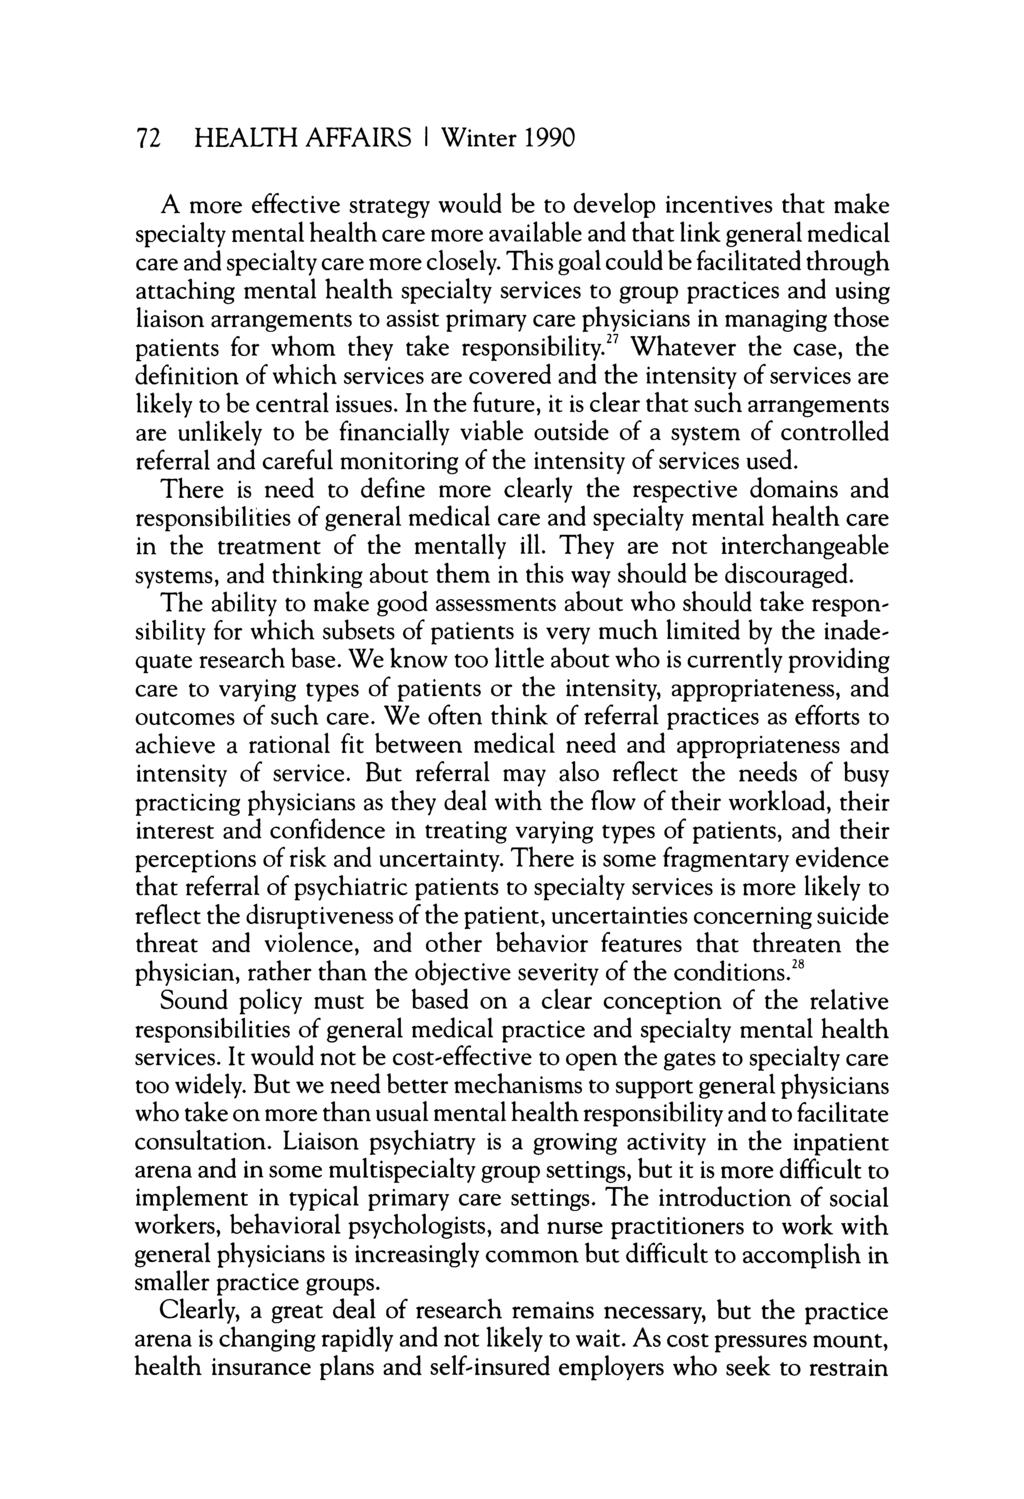 72 HEALTH AFFAIRS Winter 1990 A more effective strategy would be to develop incentives that make specialty mental health care more available and that link general medical care and specialty care more